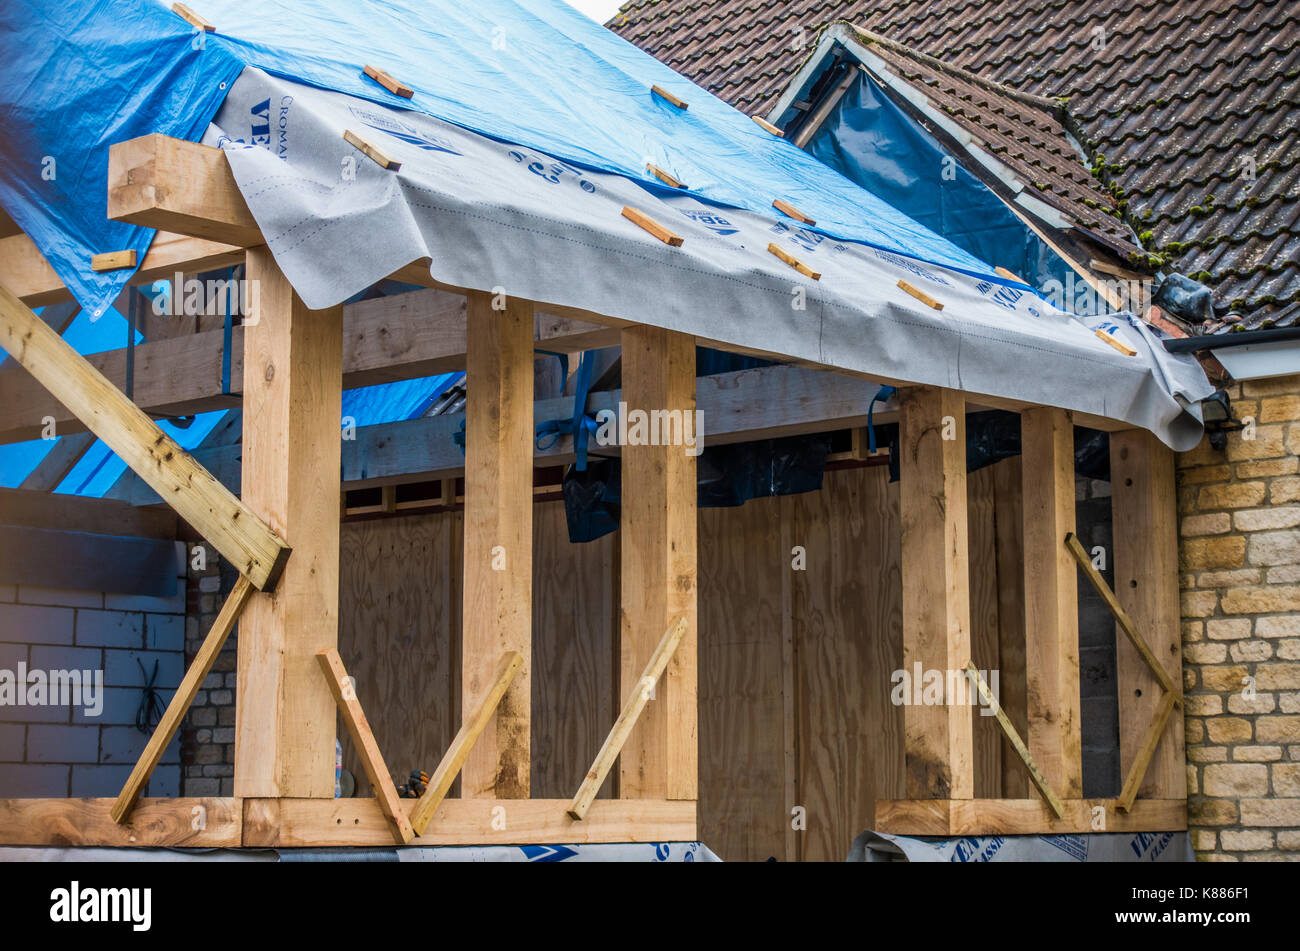 A house extension undergoing construction, with a substantial wooden structure and protective covering over the pitched roof timbers. England, UK. Stock Photo